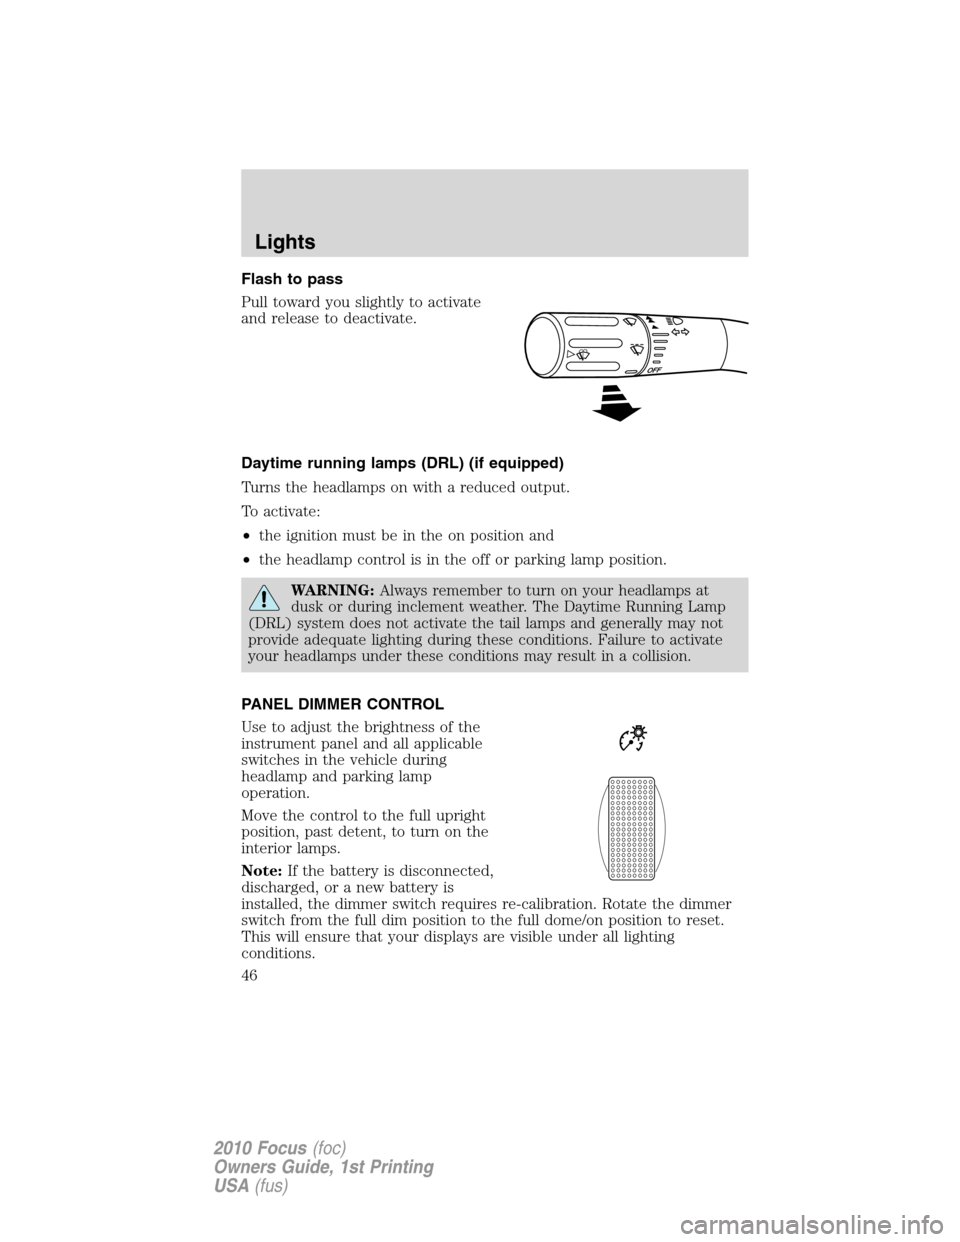 FORD FOCUS 2010 2.G User Guide Flash to pass
Pull toward you slightly to activate
and release to deactivate.
Daytime running lamps (DRL) (if equipped)
Turns the headlamps on with a reduced output.
To activate:
•the ignition must 